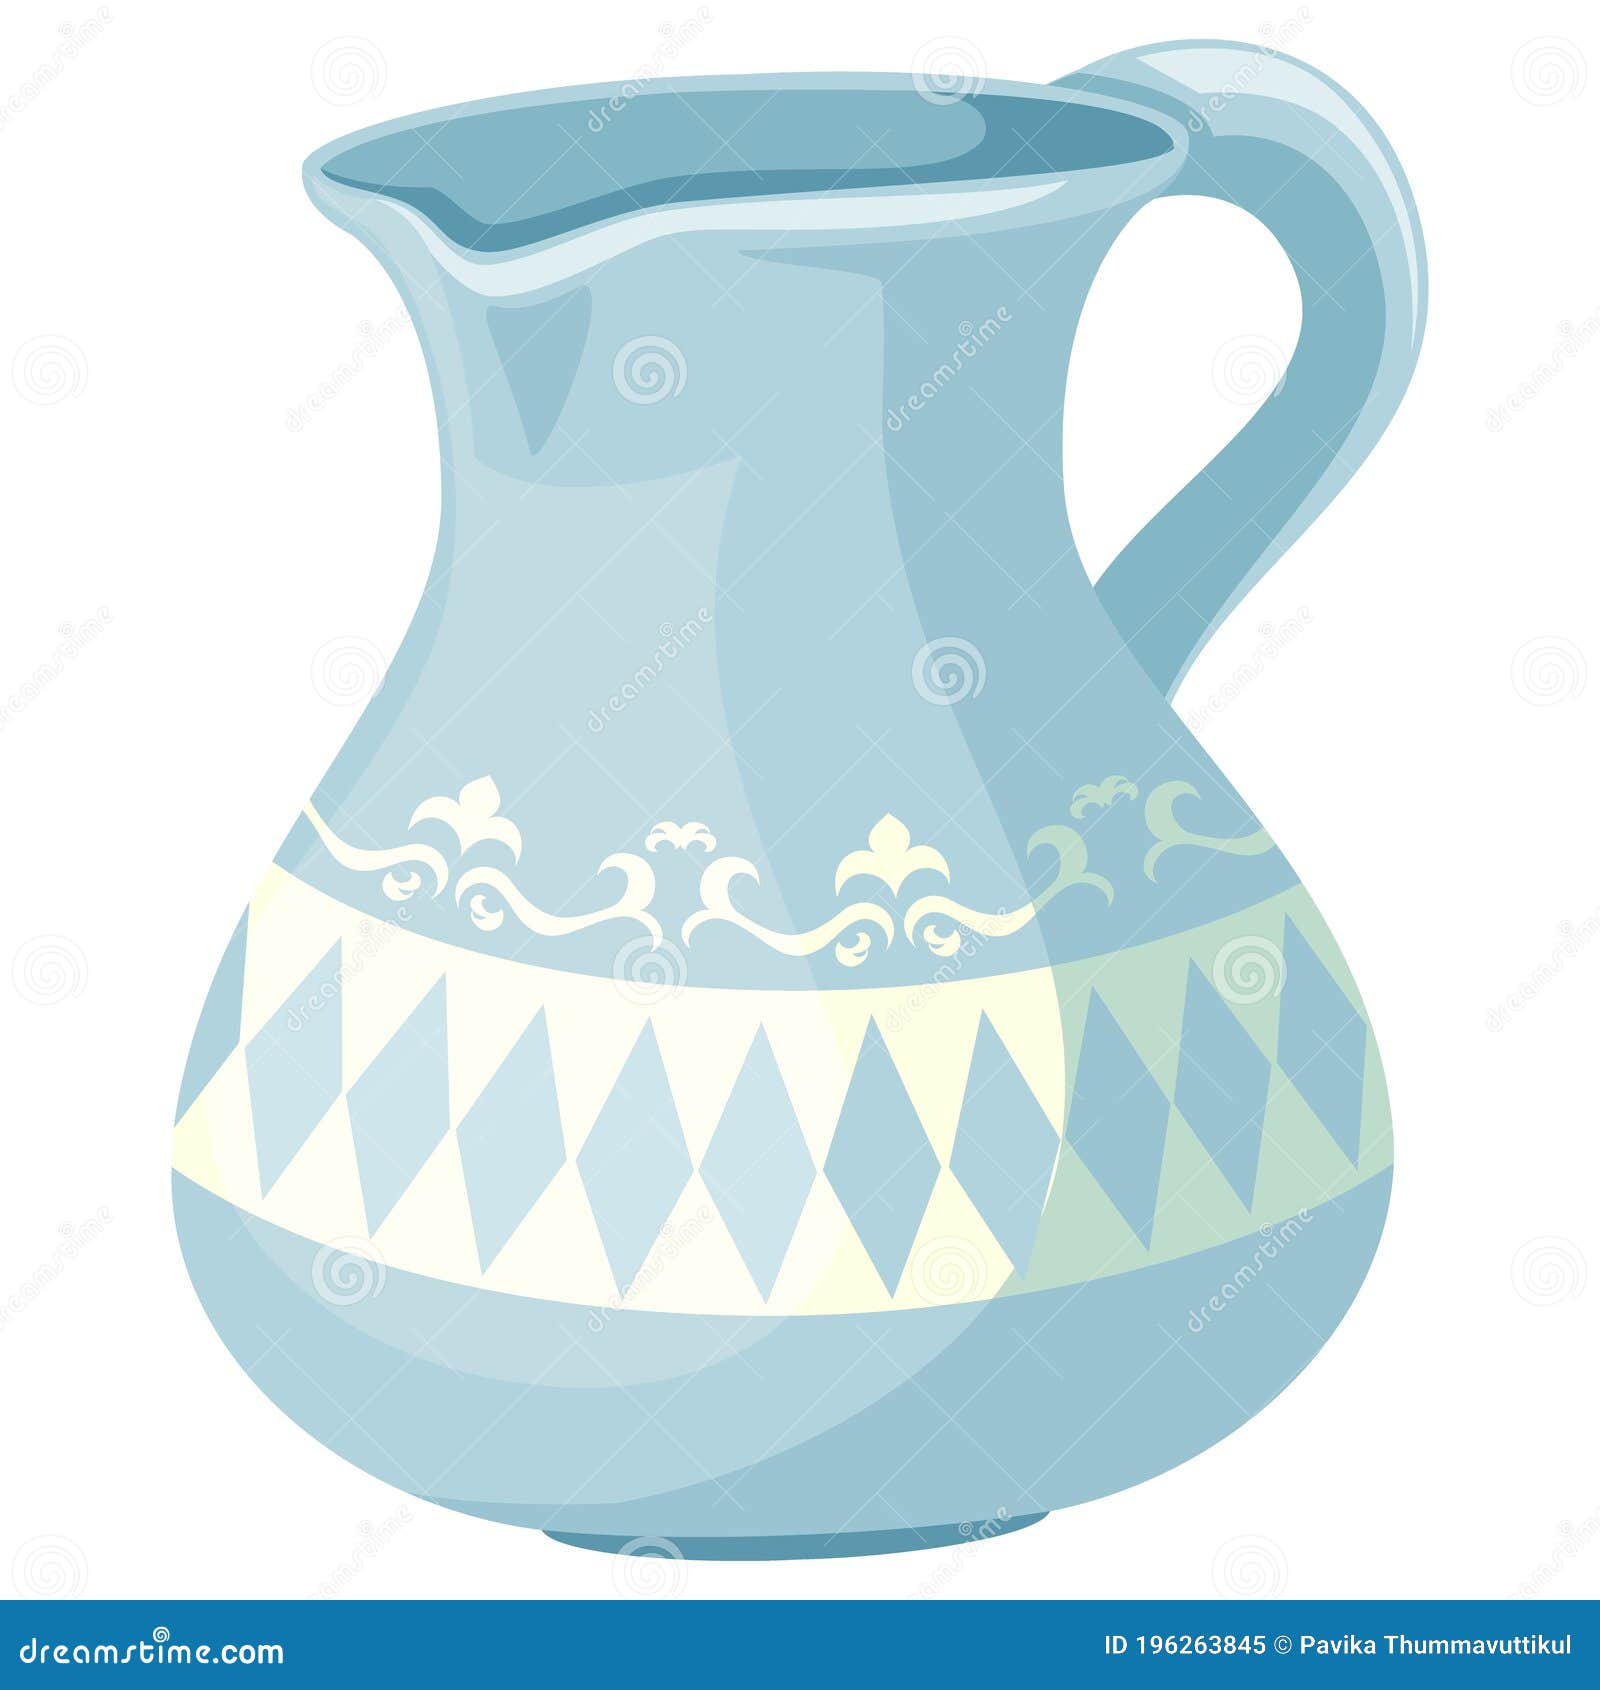 https://thumbs.dreamstime.com/z/cute-pitcher-clipart-isolated-white-background-vector-illustration-cute-pitcher-clipart-196263845.jpg